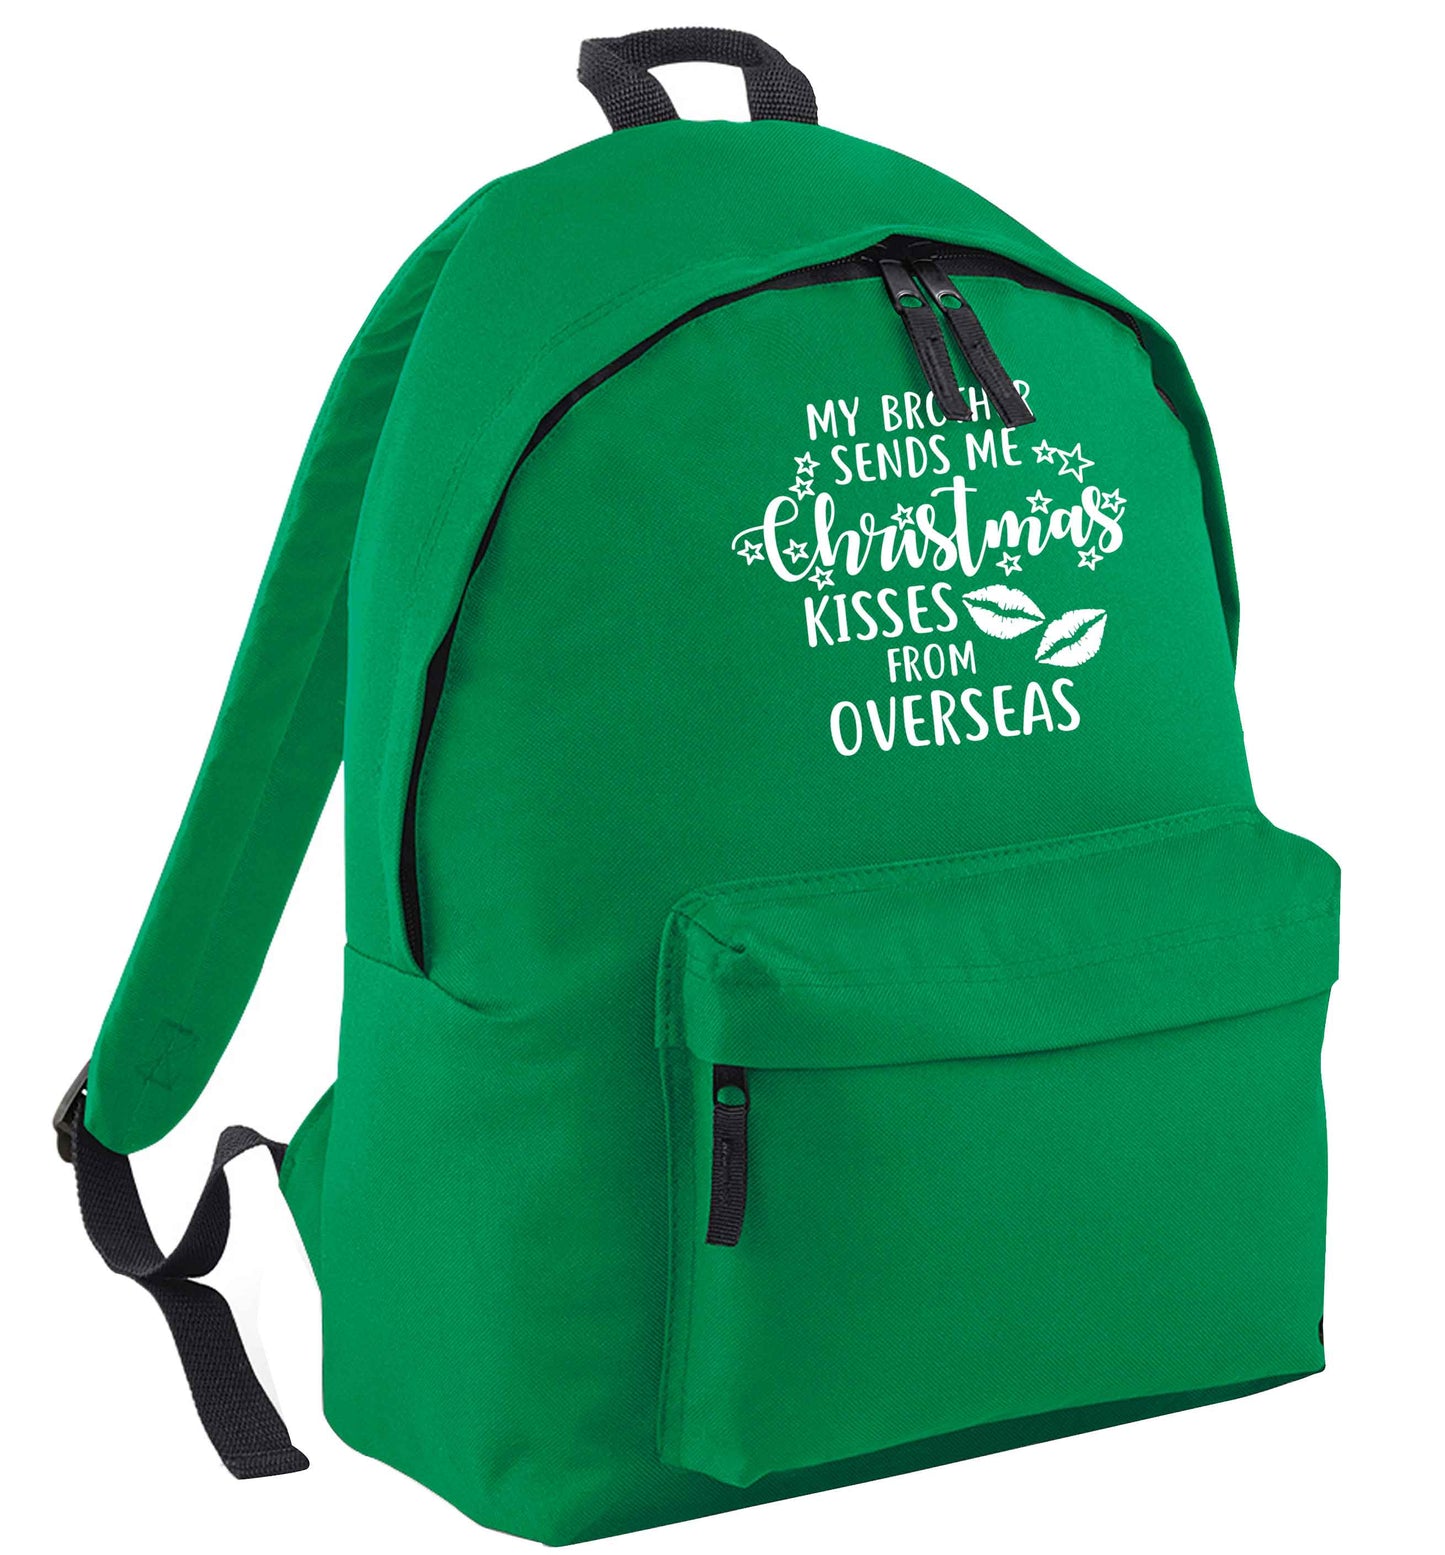 Brother Christmas Kisses Overseas green adults backpack